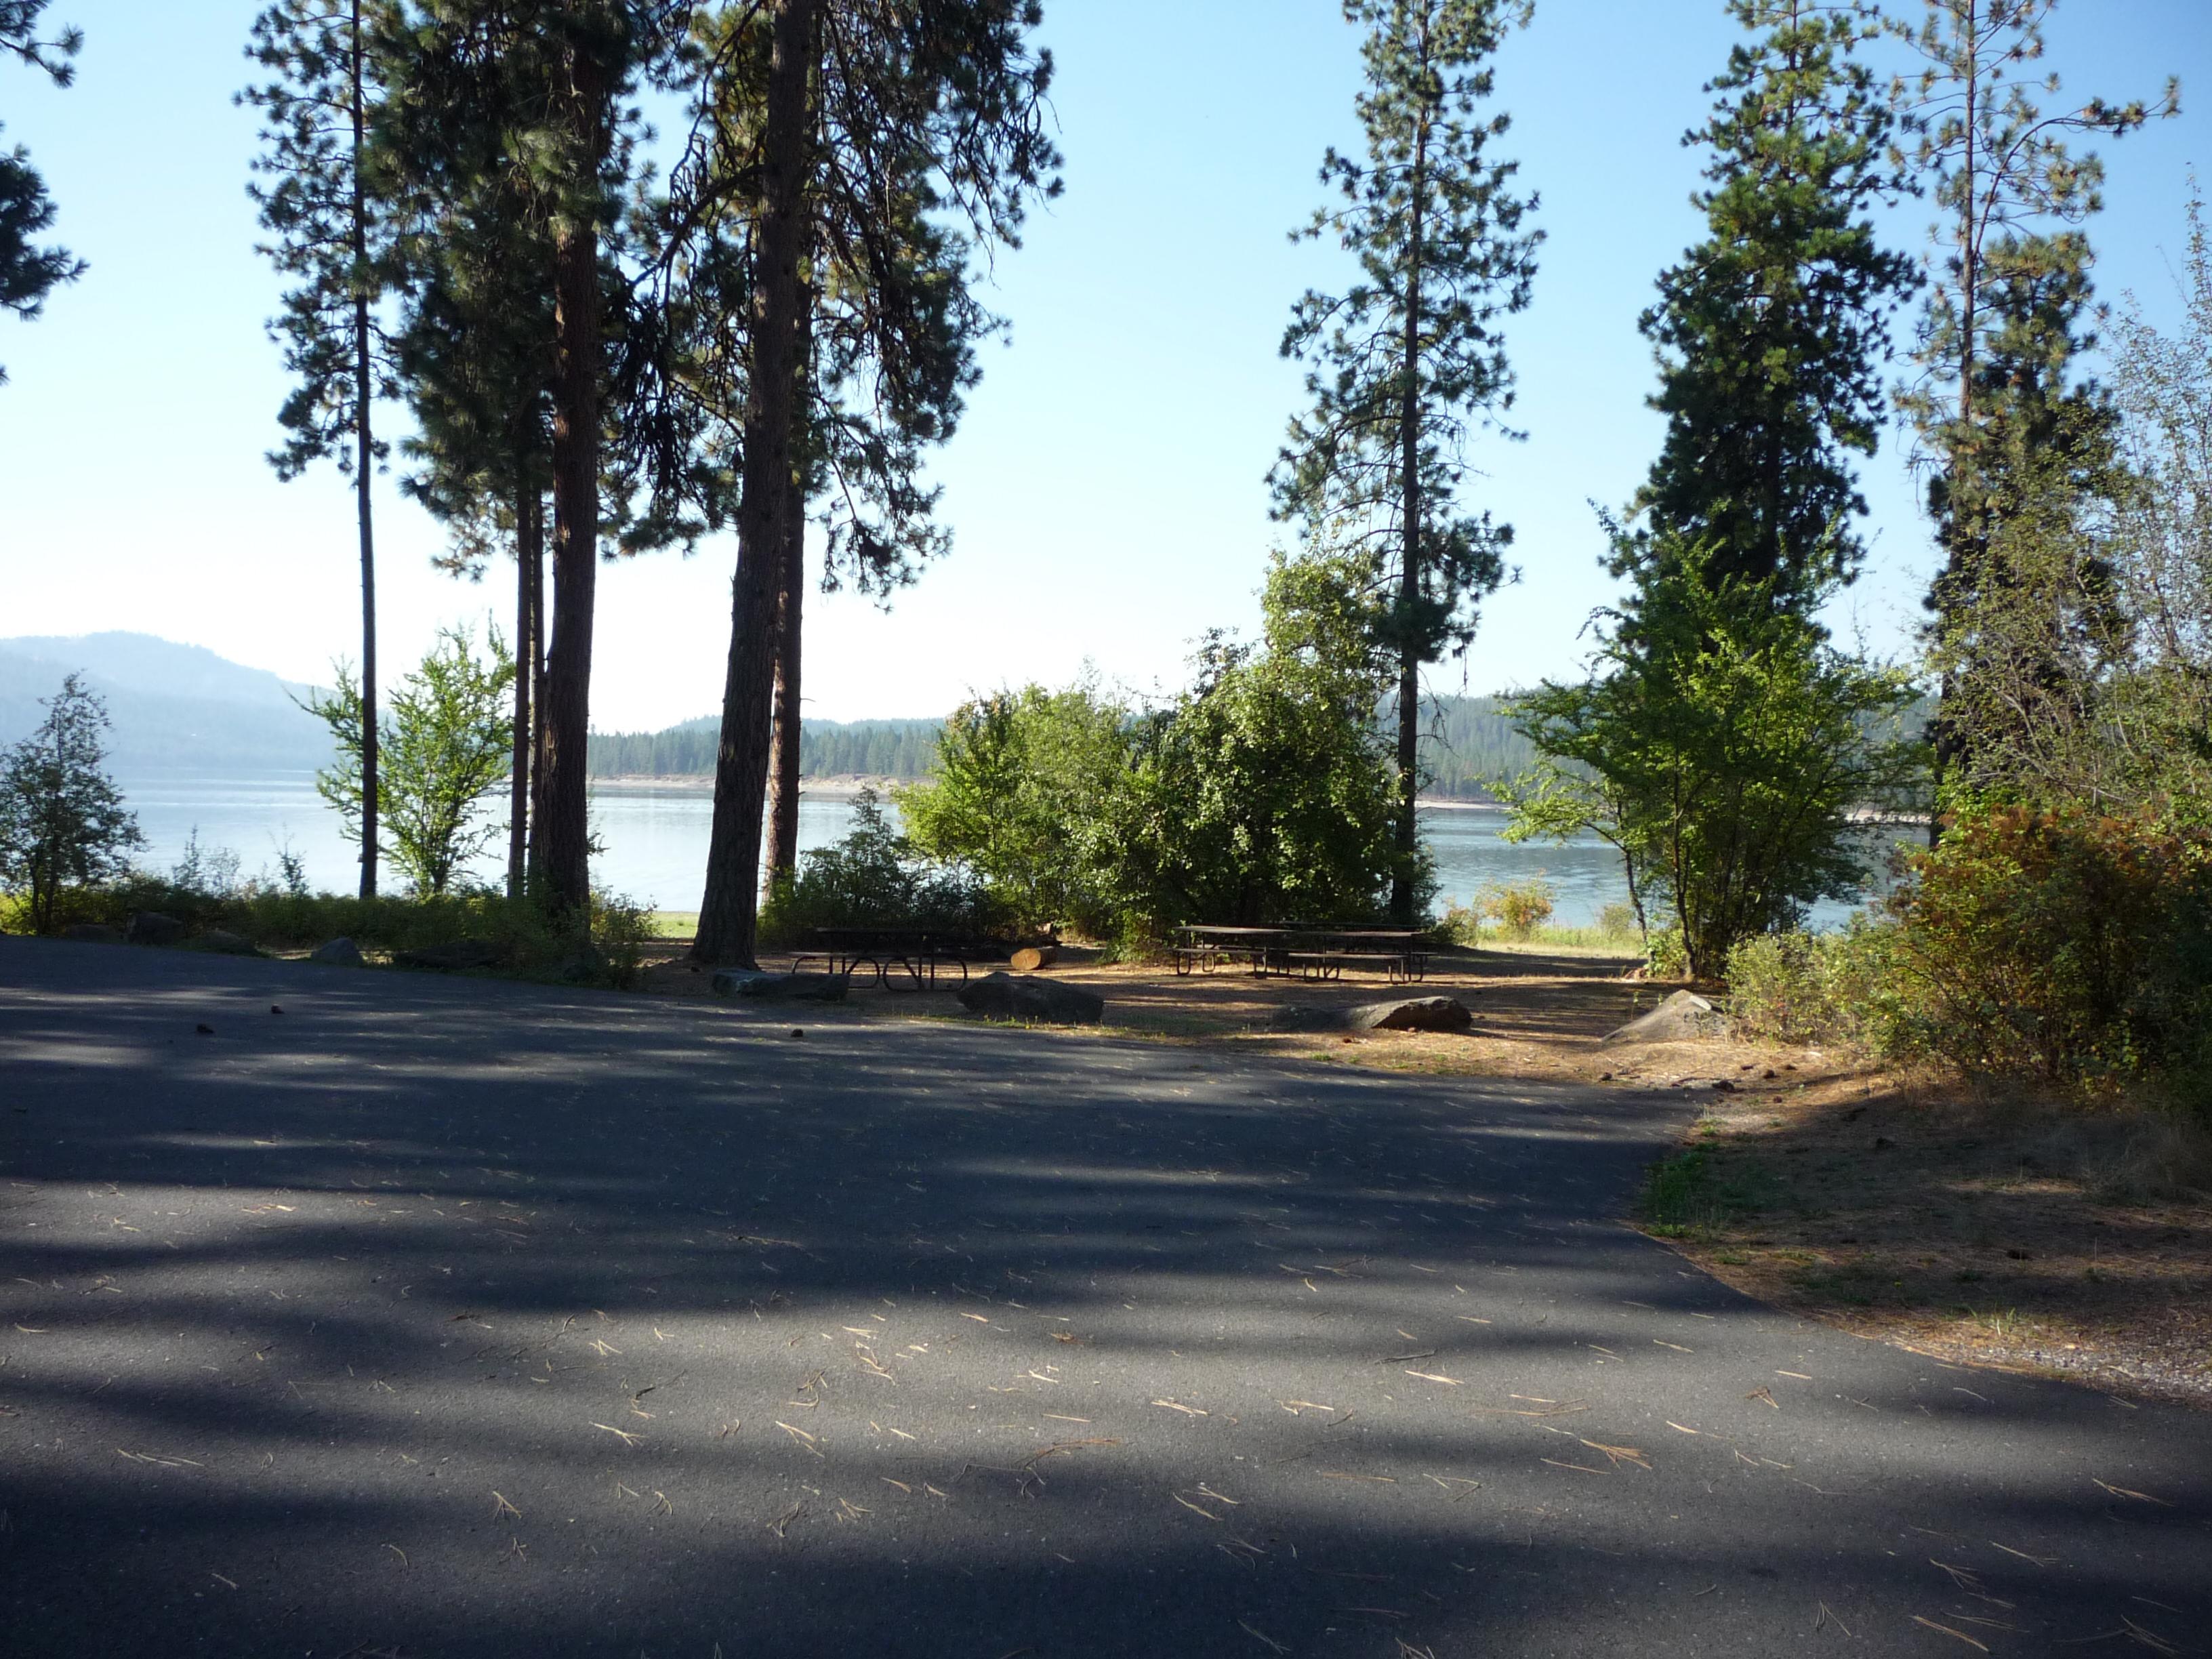 An open group camping site on the shoreline with trees and picnic tables.